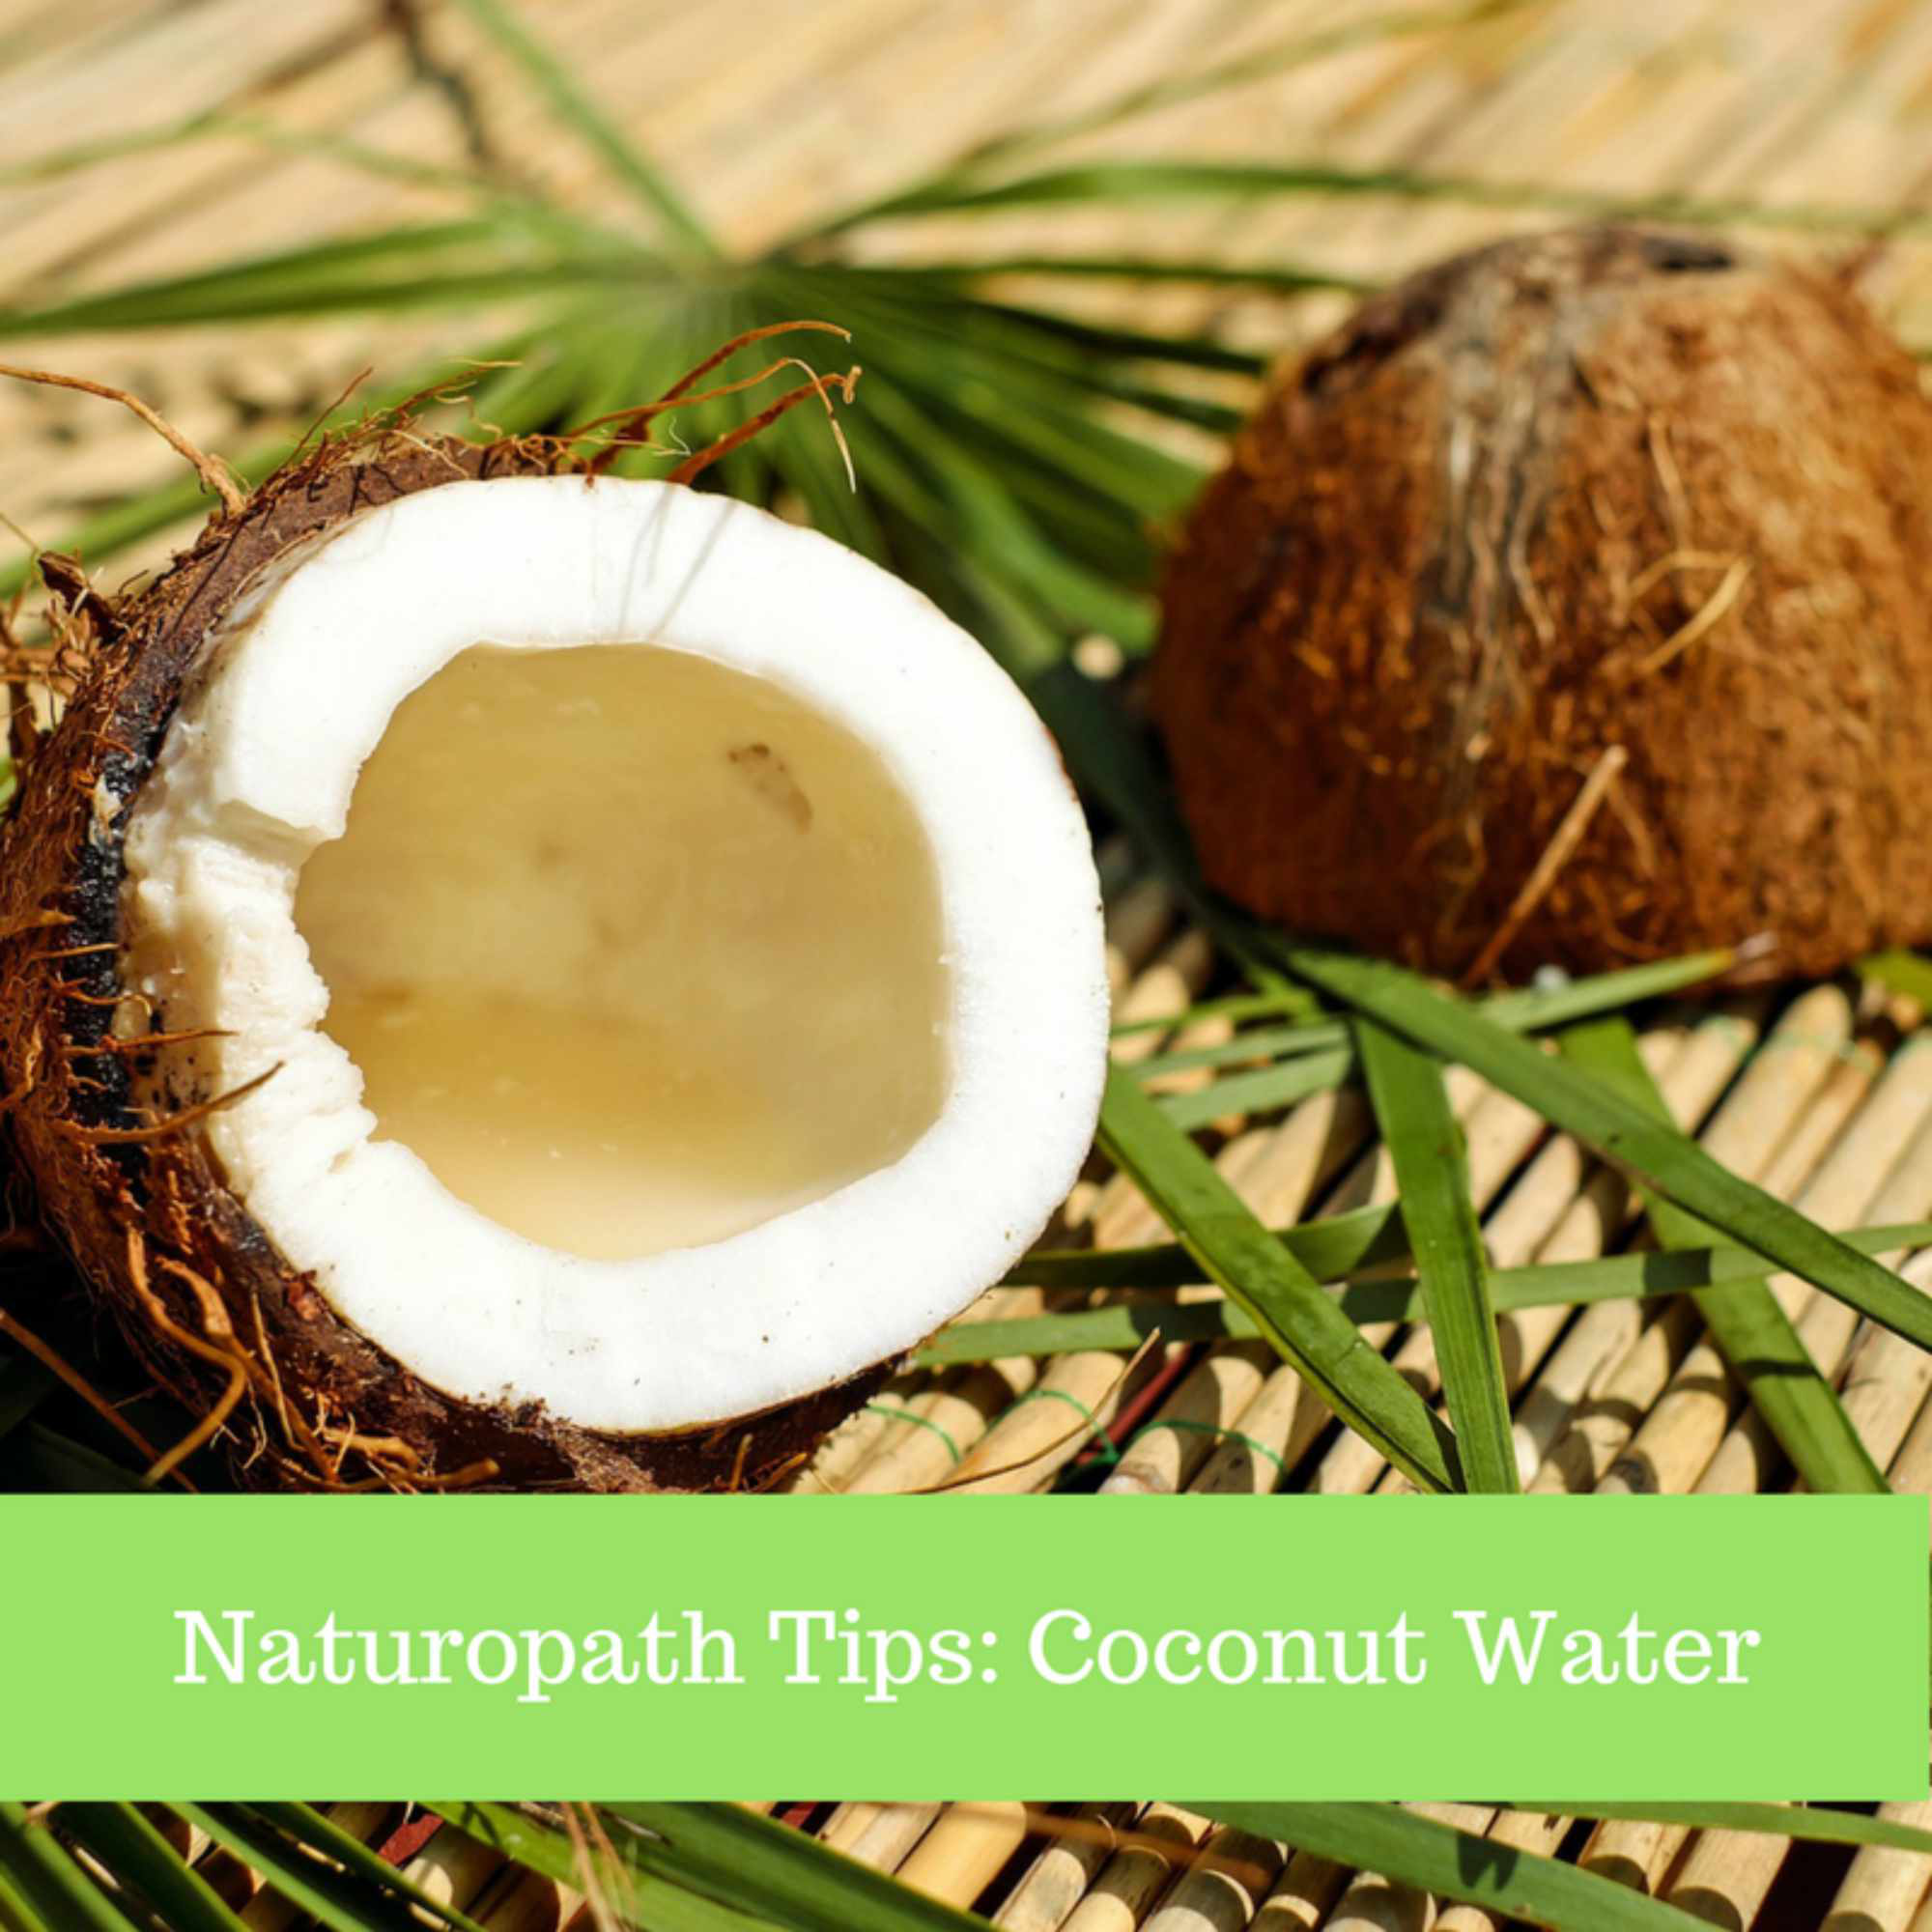 Naturopath Tip Why You Should Replace Sugary Sports Drinks With Coconut Water